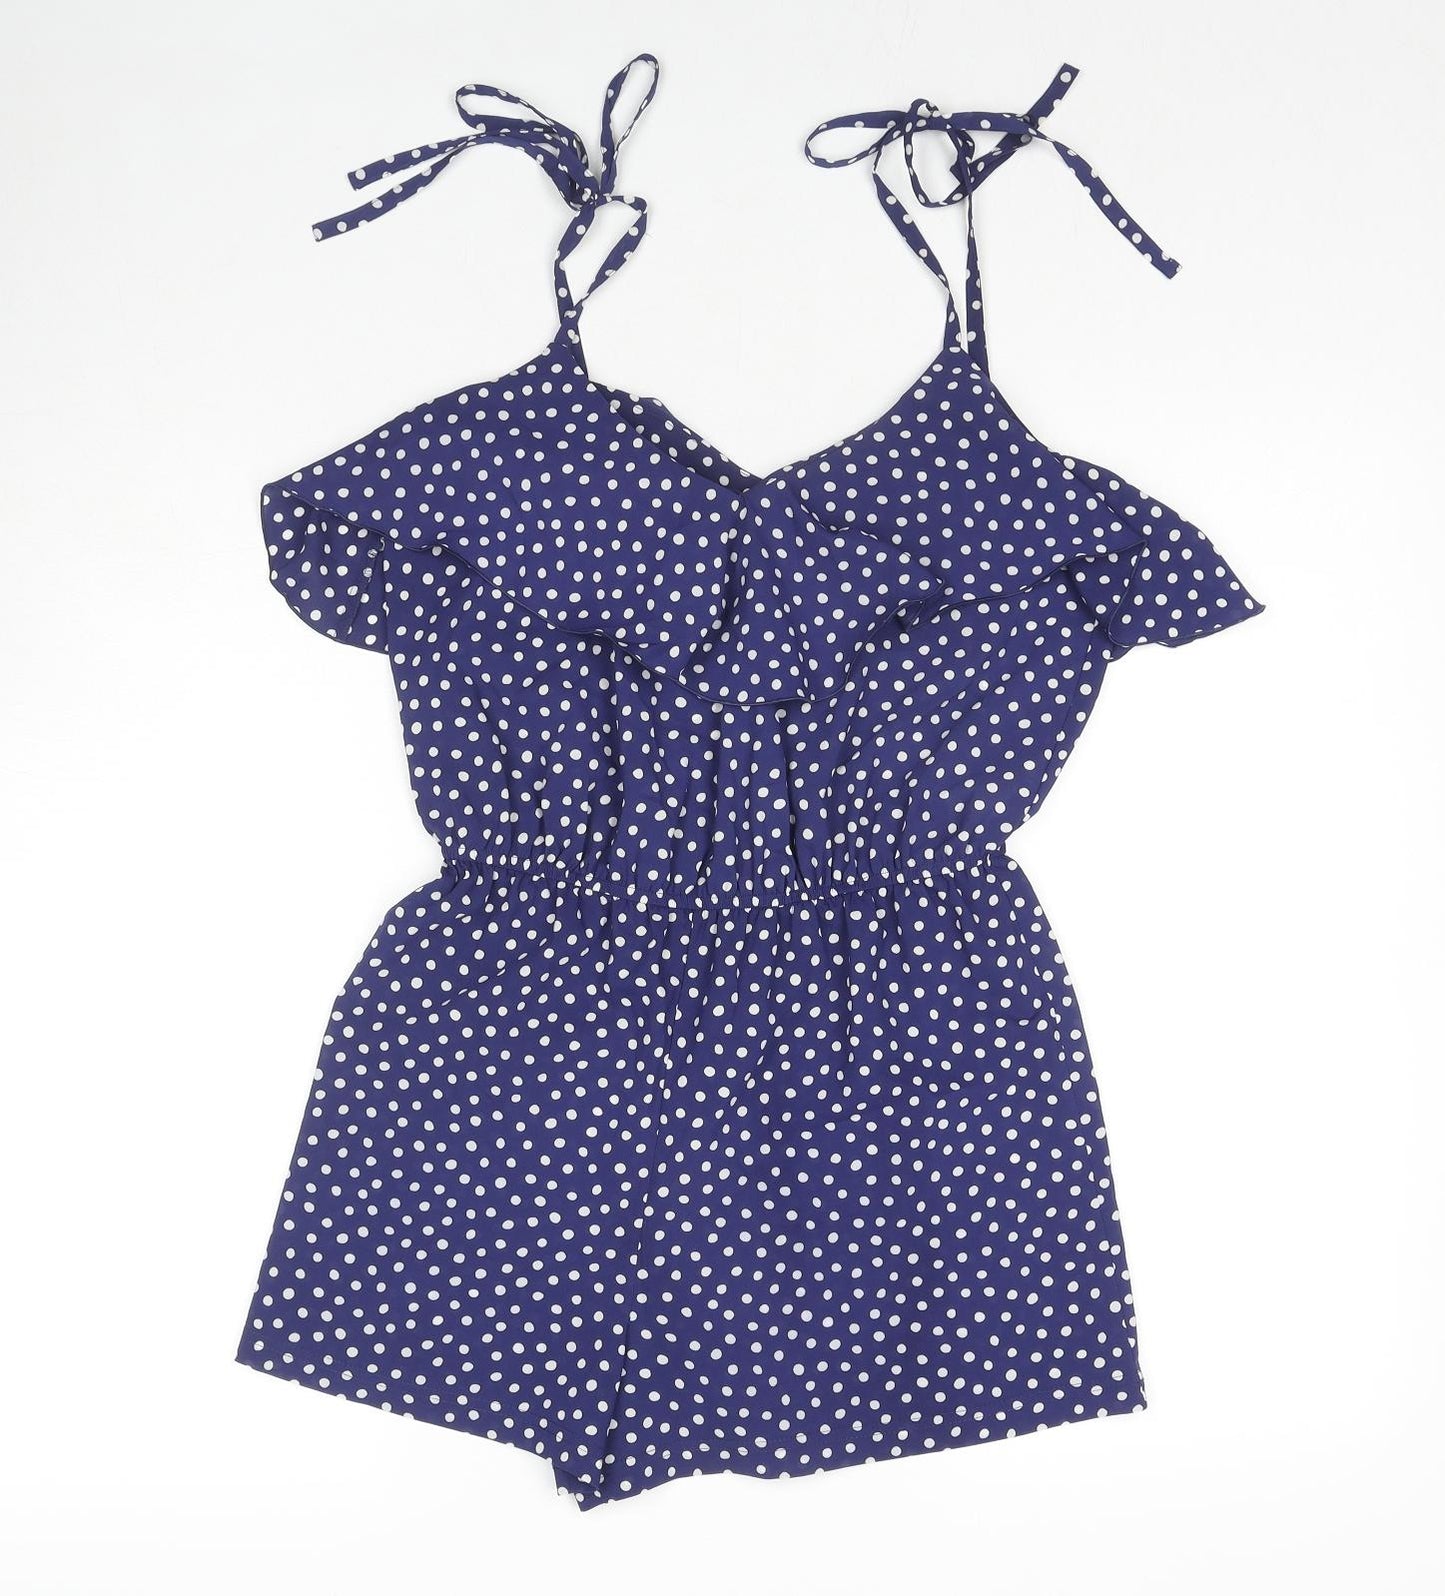 Frost French Womens Blue Polka Dot Polyester Playsuit One-Piece Size 8 L3 in Pullover